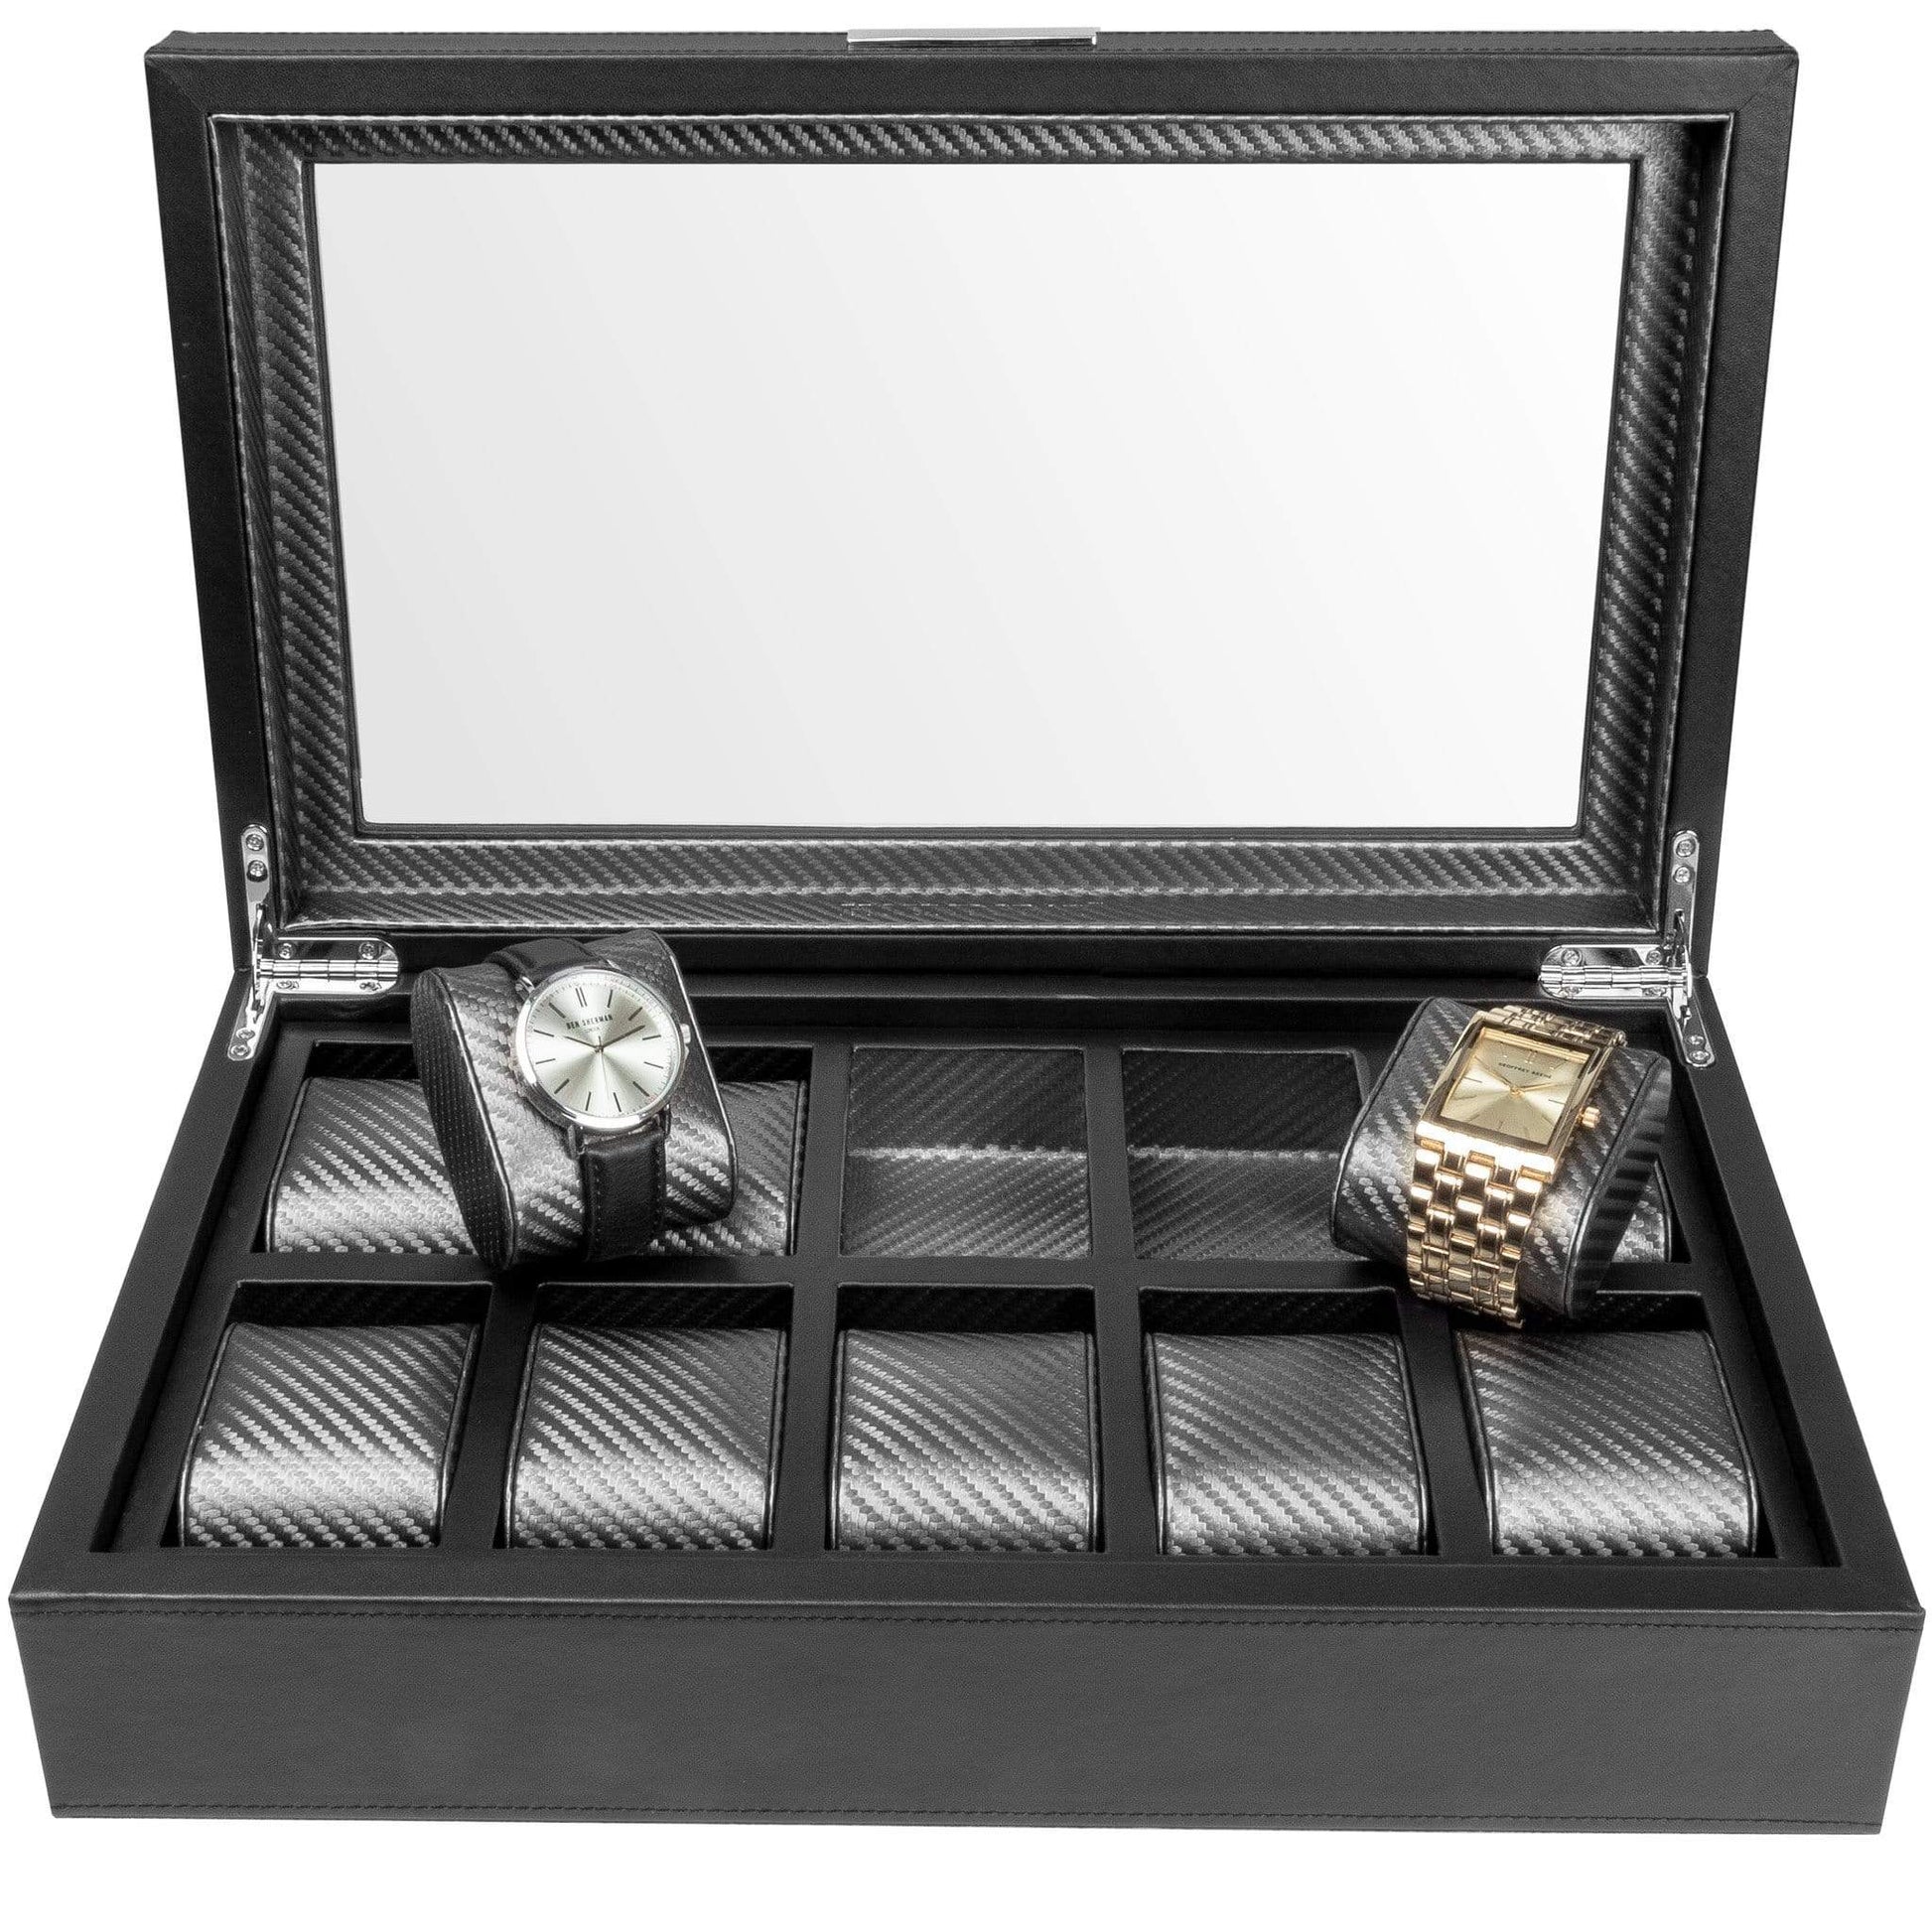 Mariner - Watch Display Box with Carbon Fiber Patterned Interior - 10 –  HOUNDSBAY